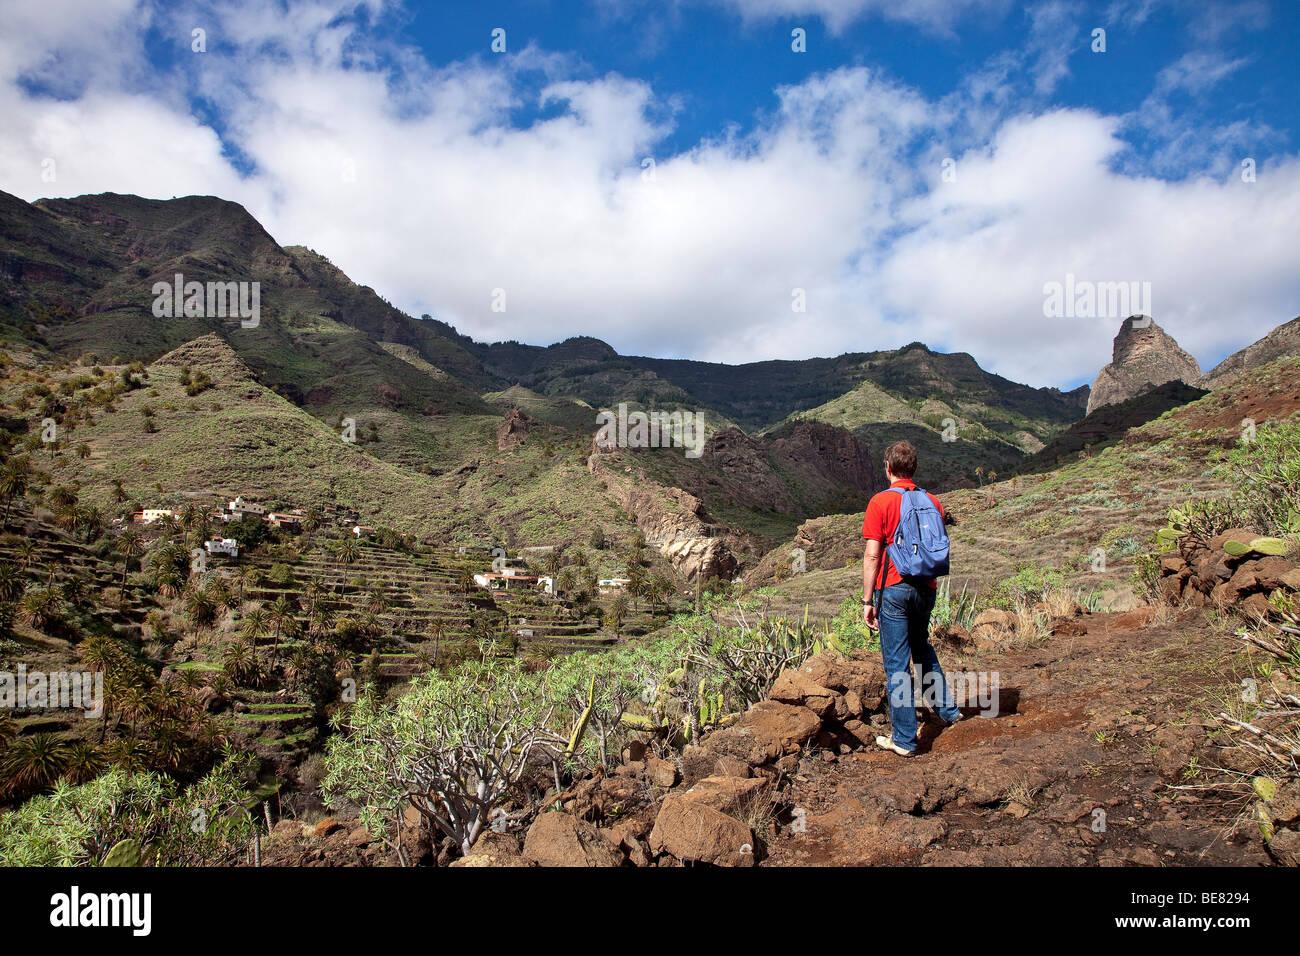 Hiker in the mountains looking at the view, Roque de Agando, La Gomera, Canary Islands, Spain, Europe Stock Photo